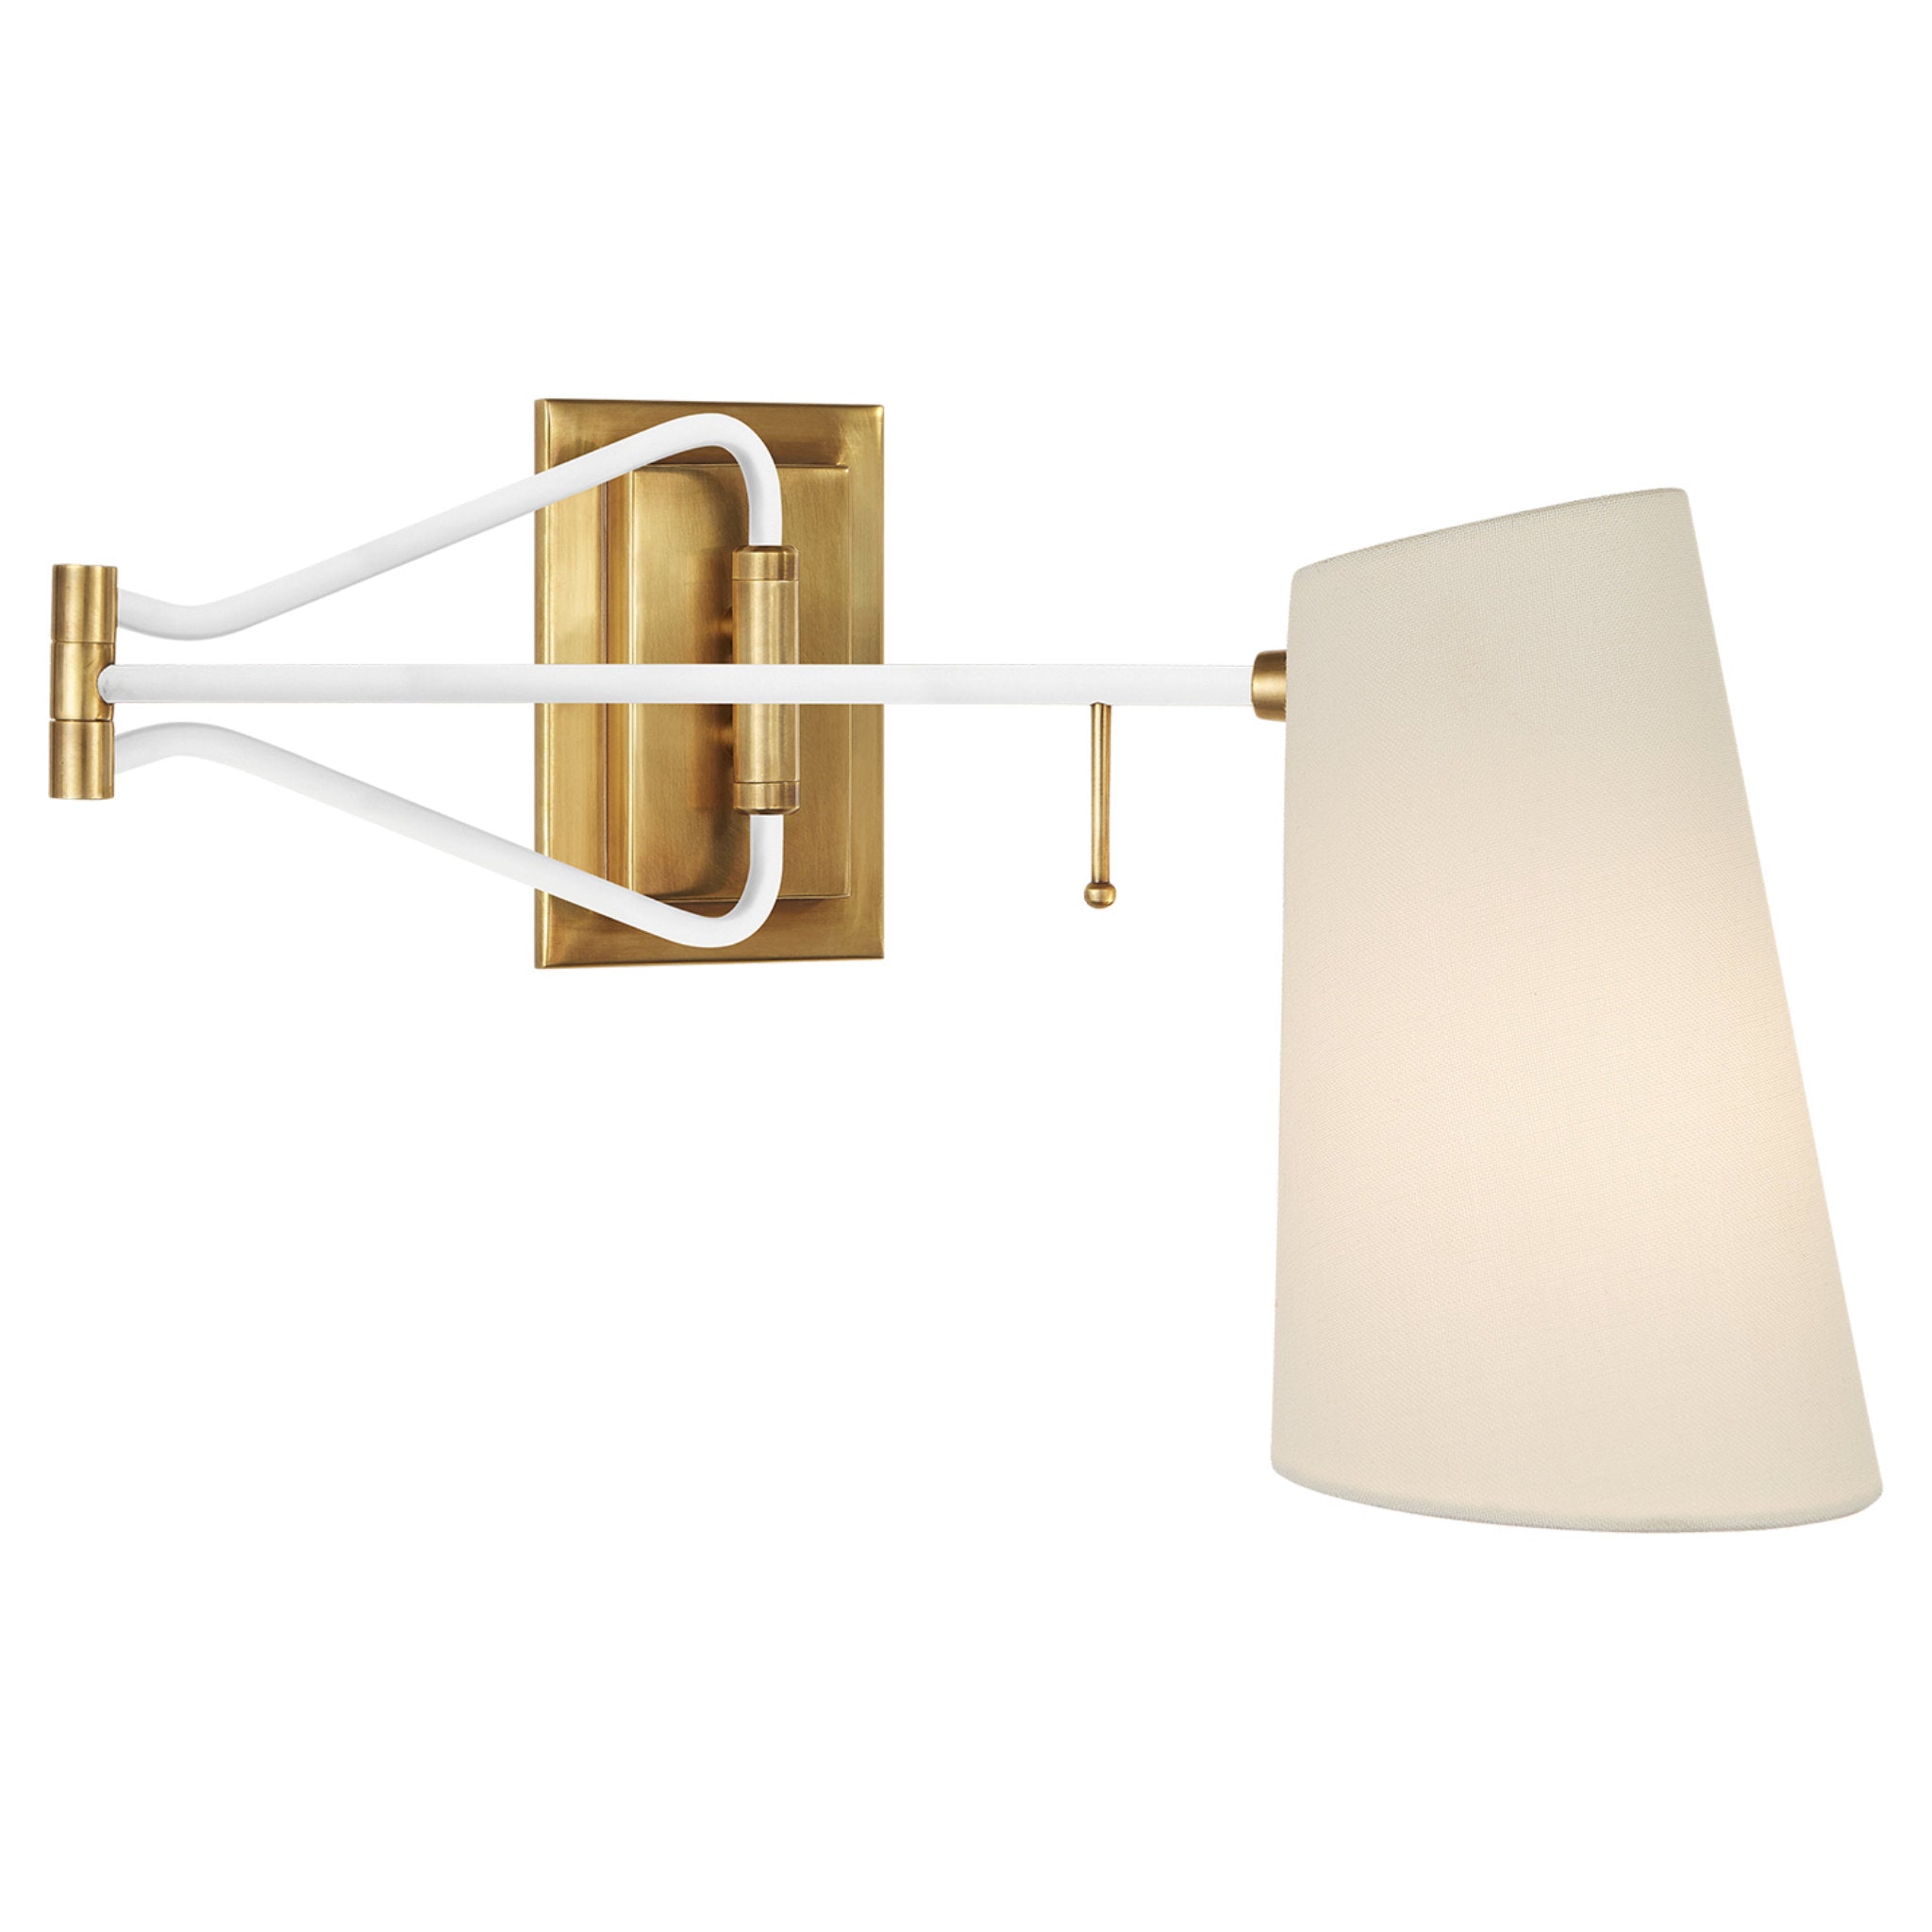 AERIN Keil Swing Arm Wall Light in Hand-Rubbed Antique Brass and White with Linen Shade